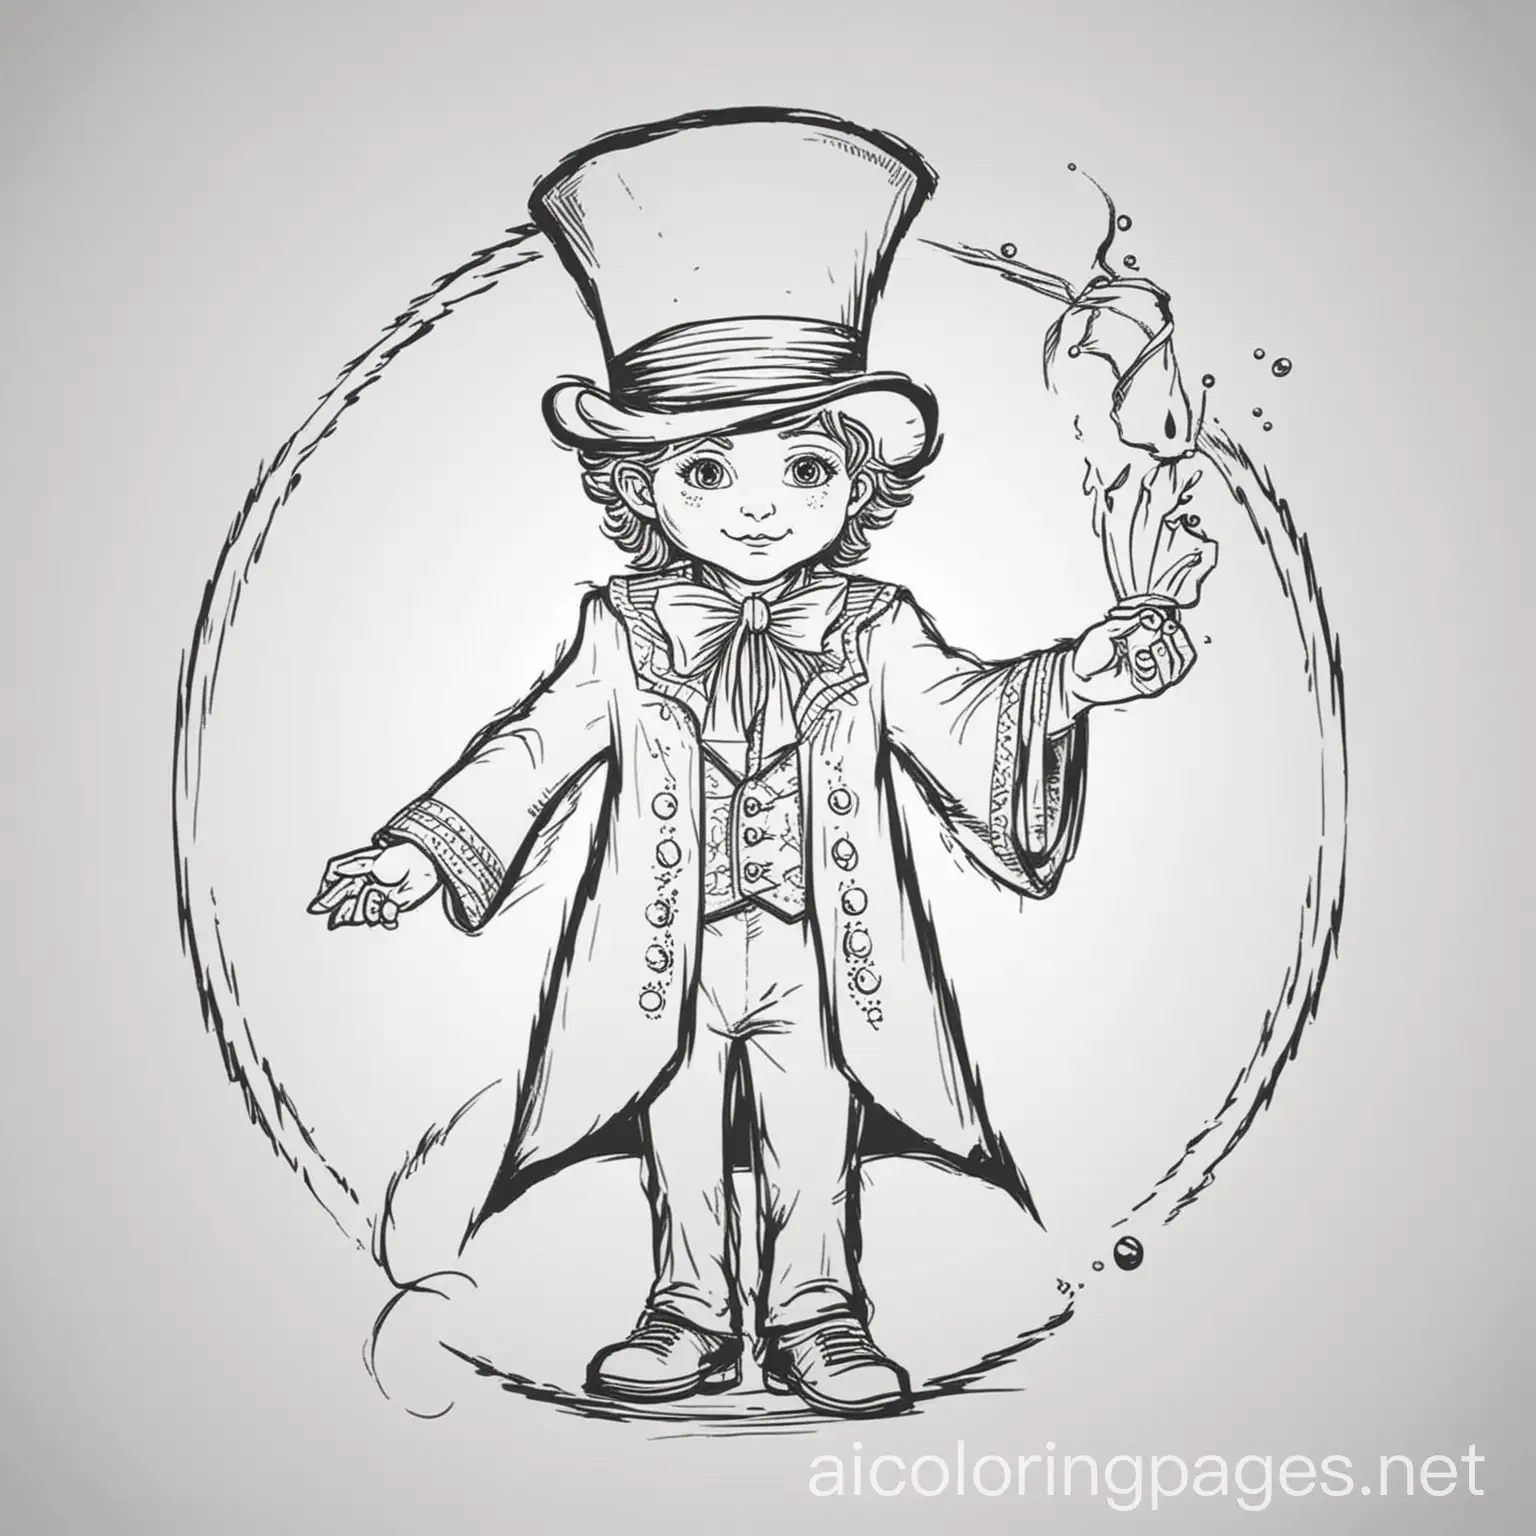 Magician-Coloring-Page-Black-and-White-Line-Art-for-Kids